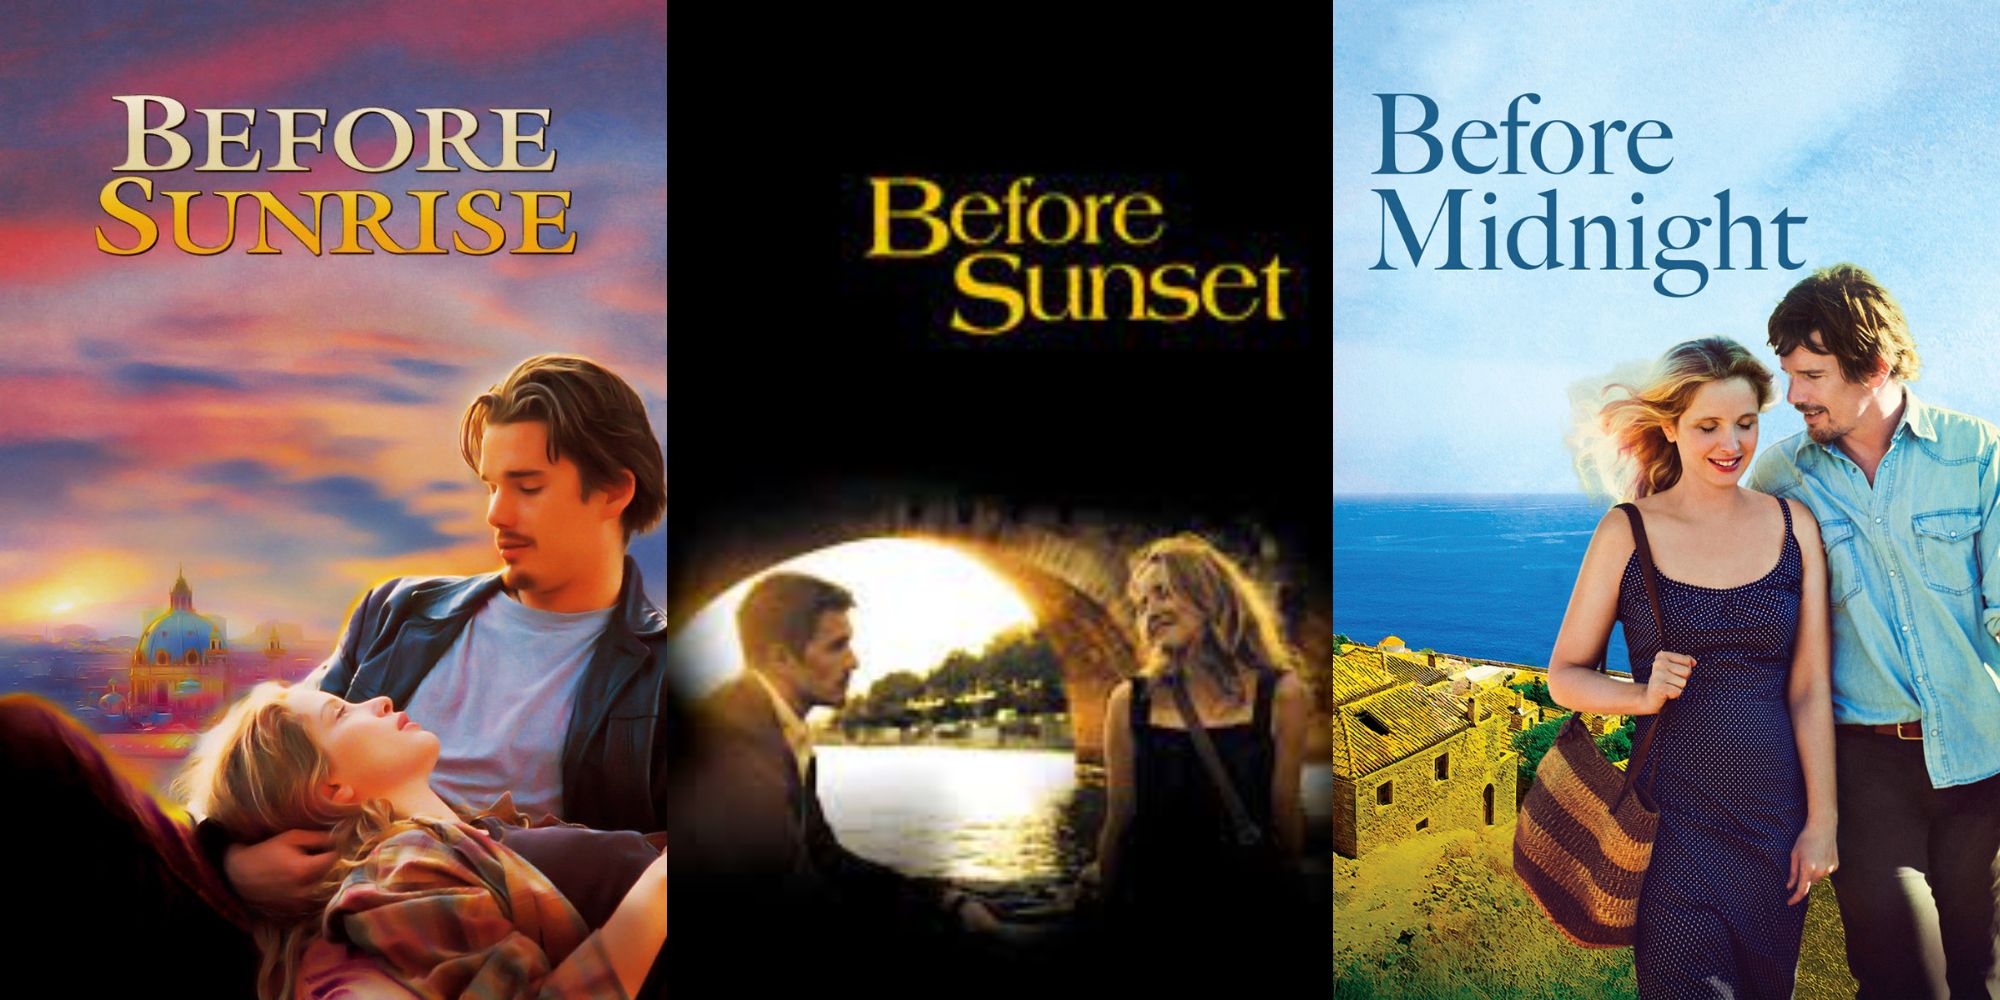 Split image showing posters for Before Sunrise, Before Sunset, and Before Midnight